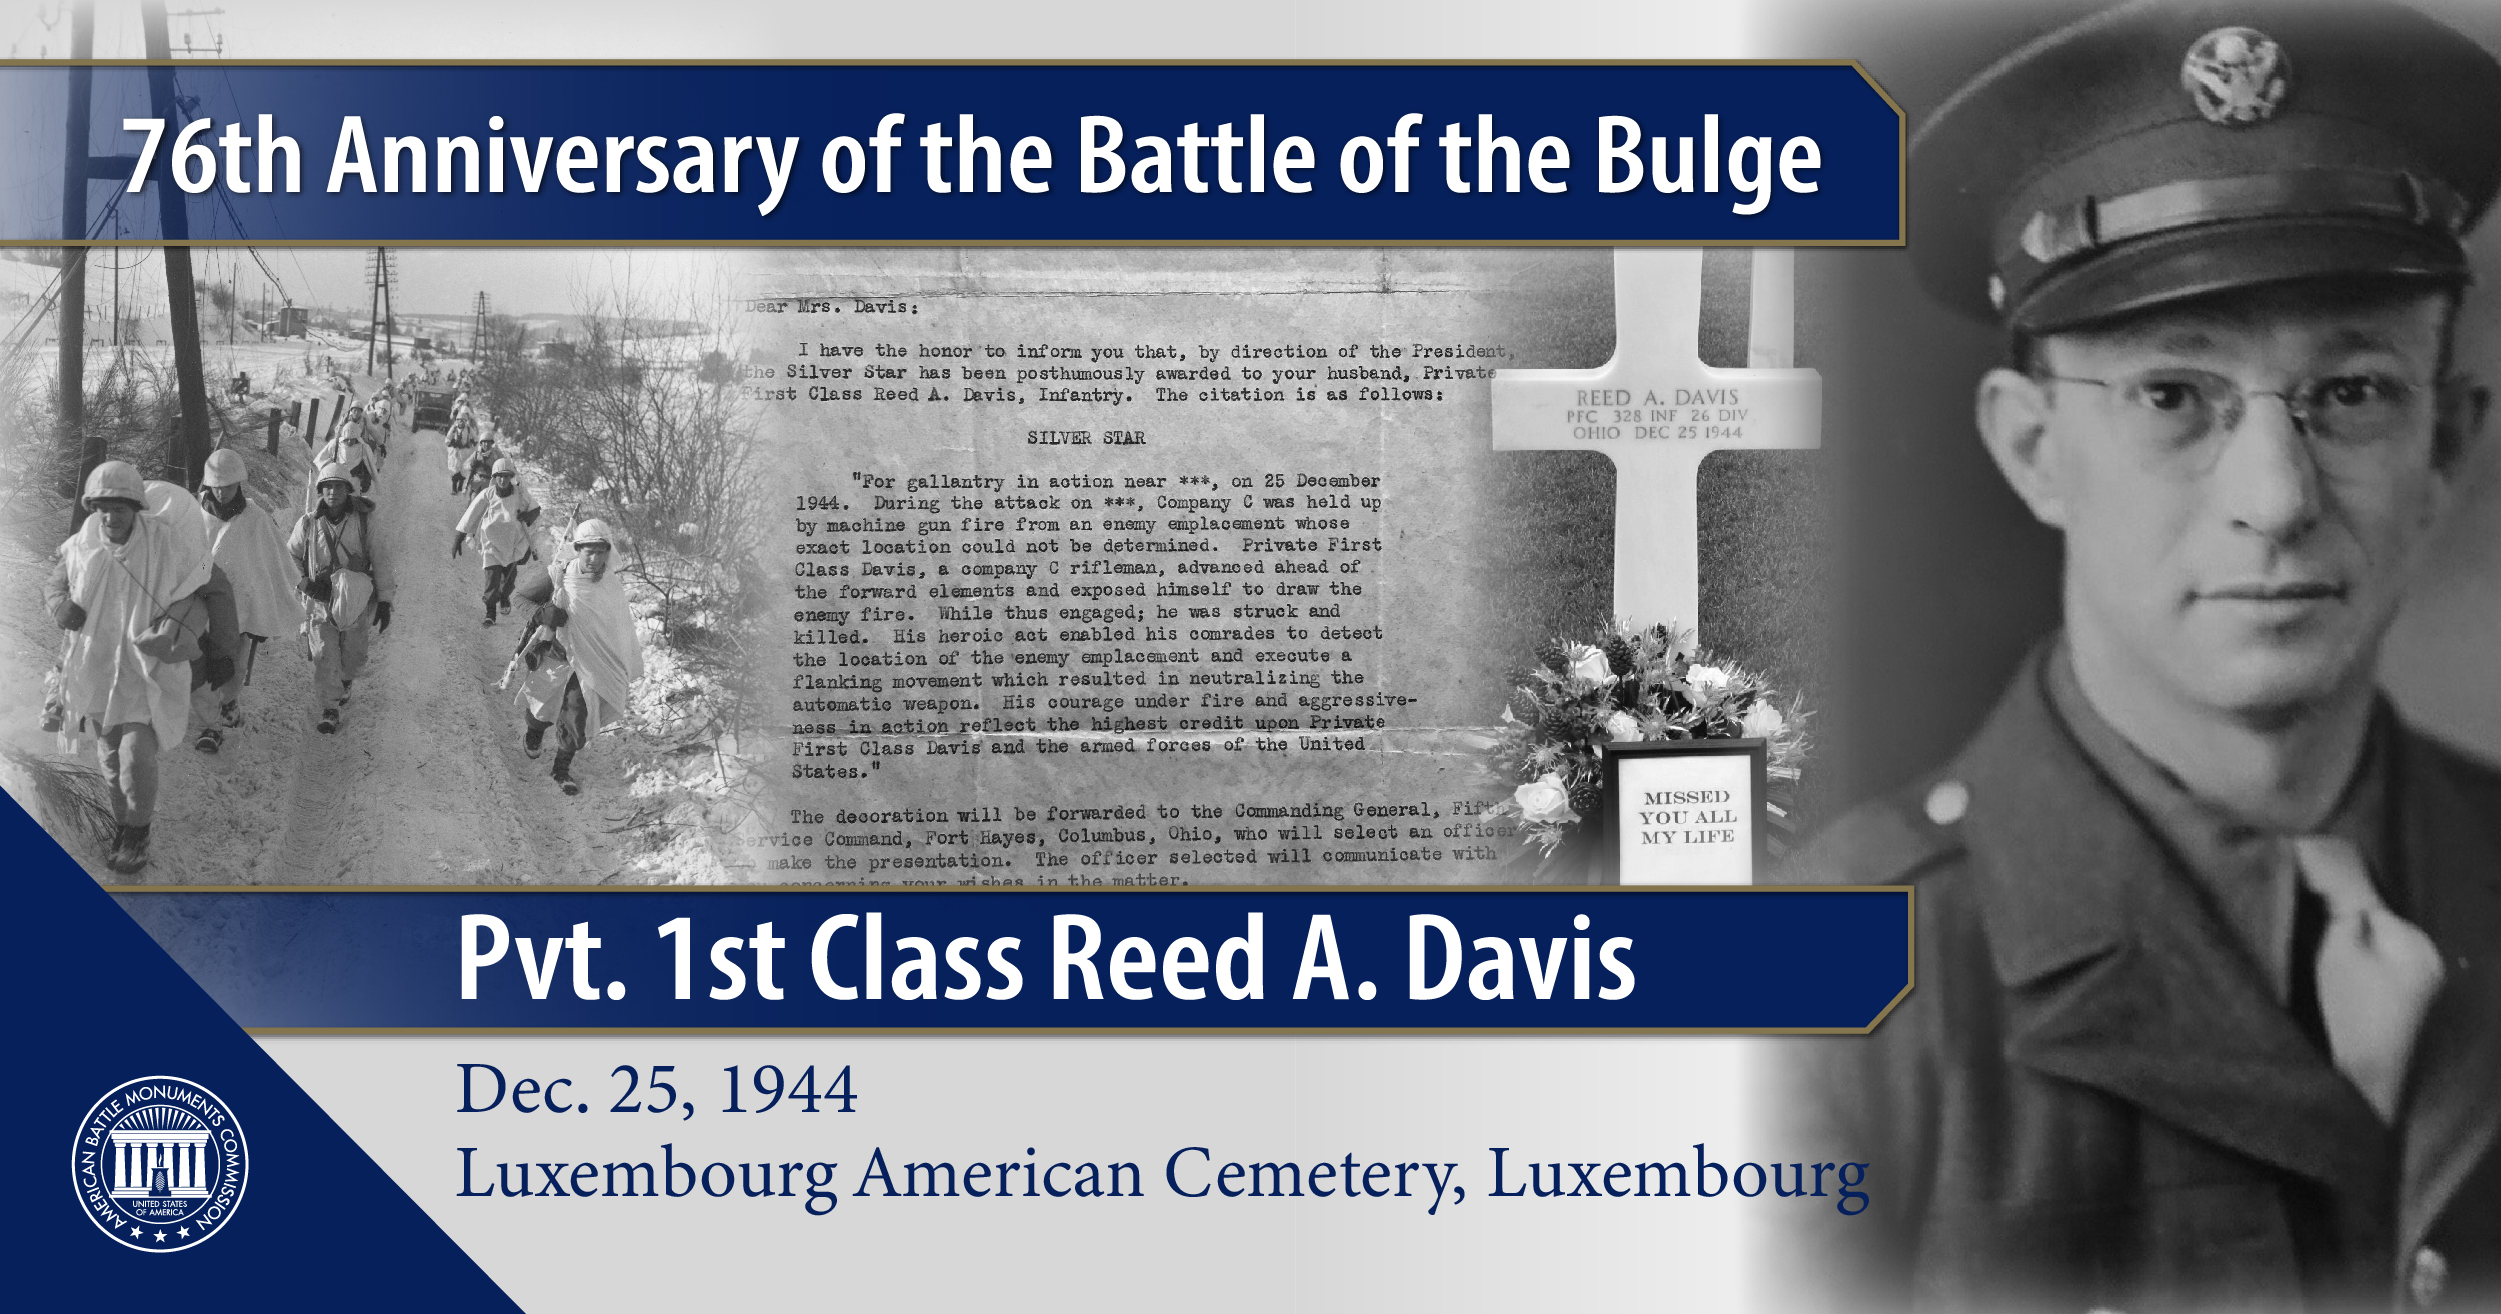 Pvt. Reed A. Davis, buried in Luxembourg American Cemetery